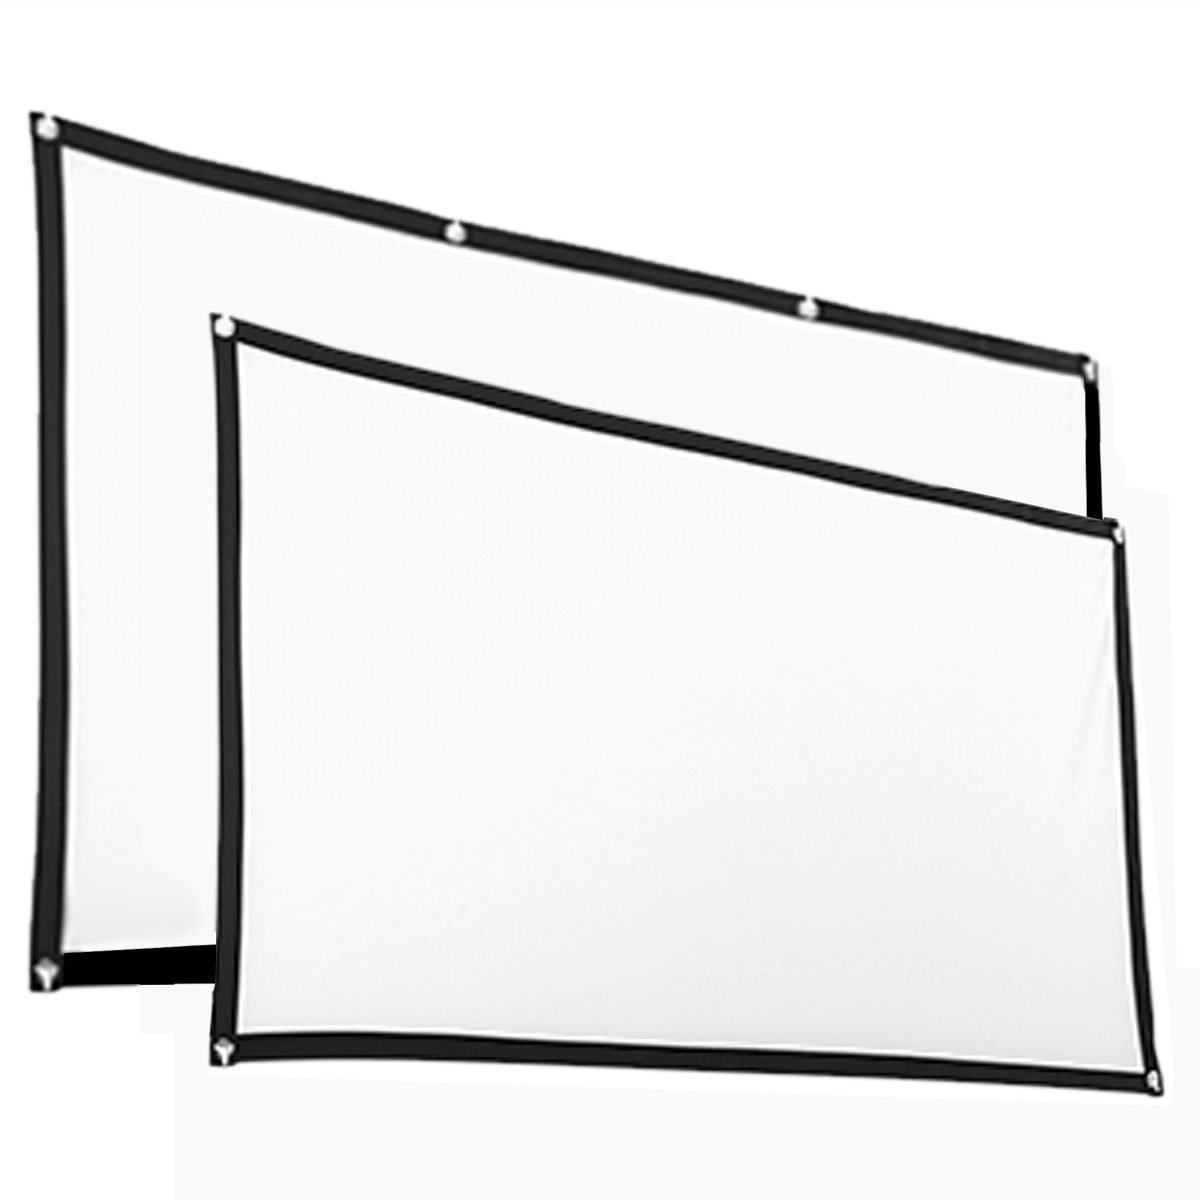 60120-Inch-Portable-Foldable-Projector-Screen-169-HD-Home-Cinema-Theater-Outdoor-1627472